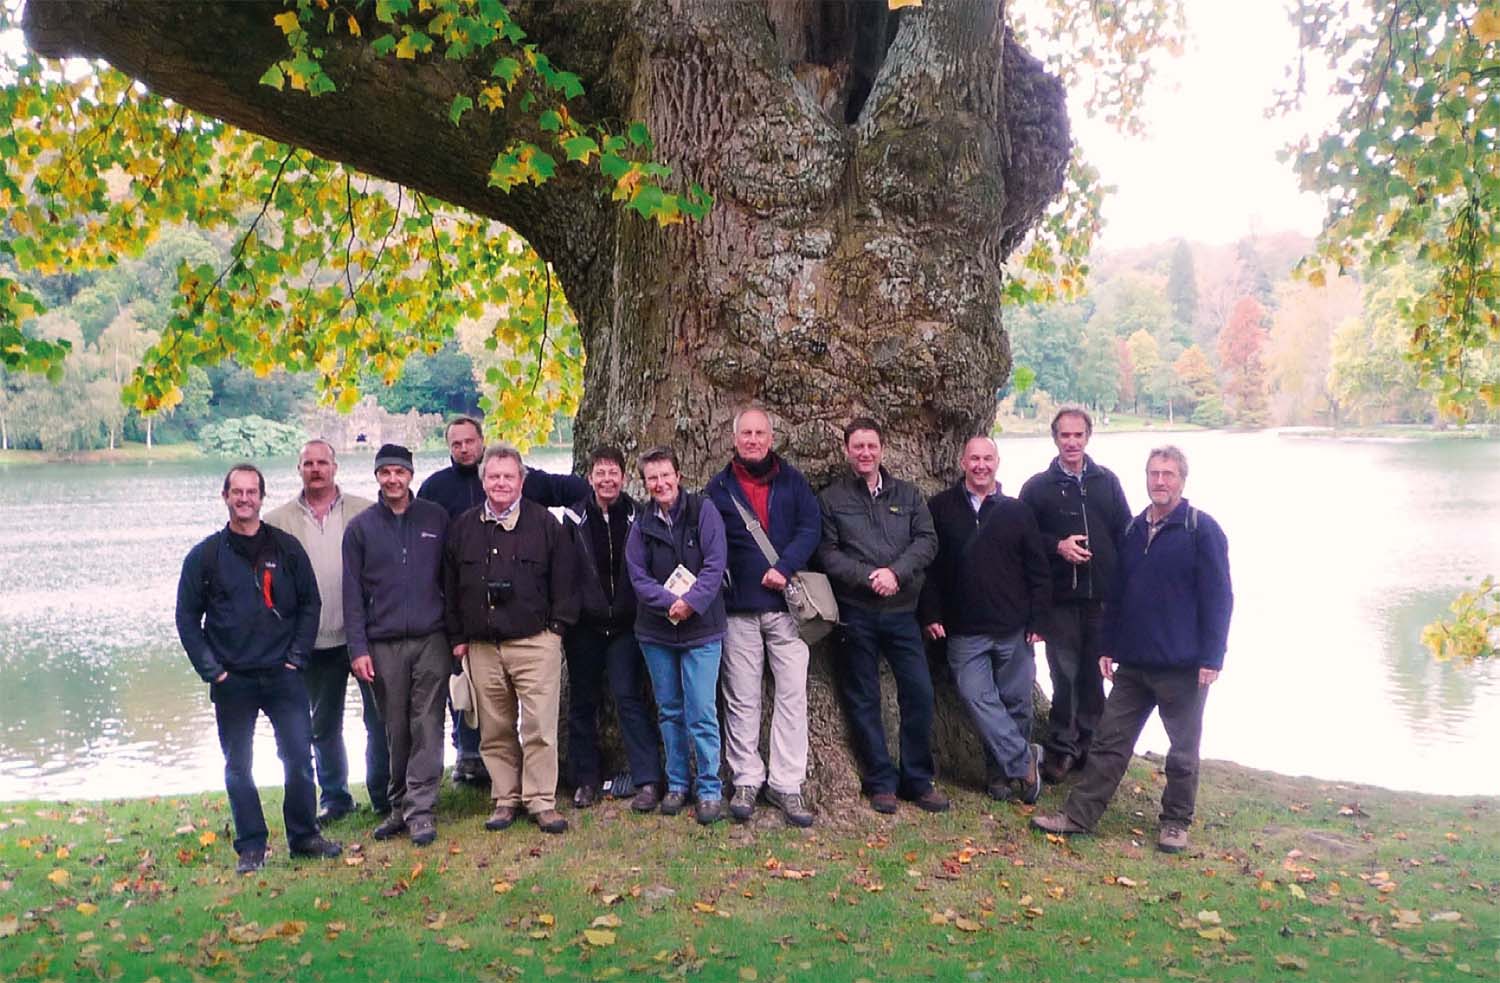 Sue (sixth from right) with fellow tree gazers under the mighty Liriodendron at Stourhead, 2011.